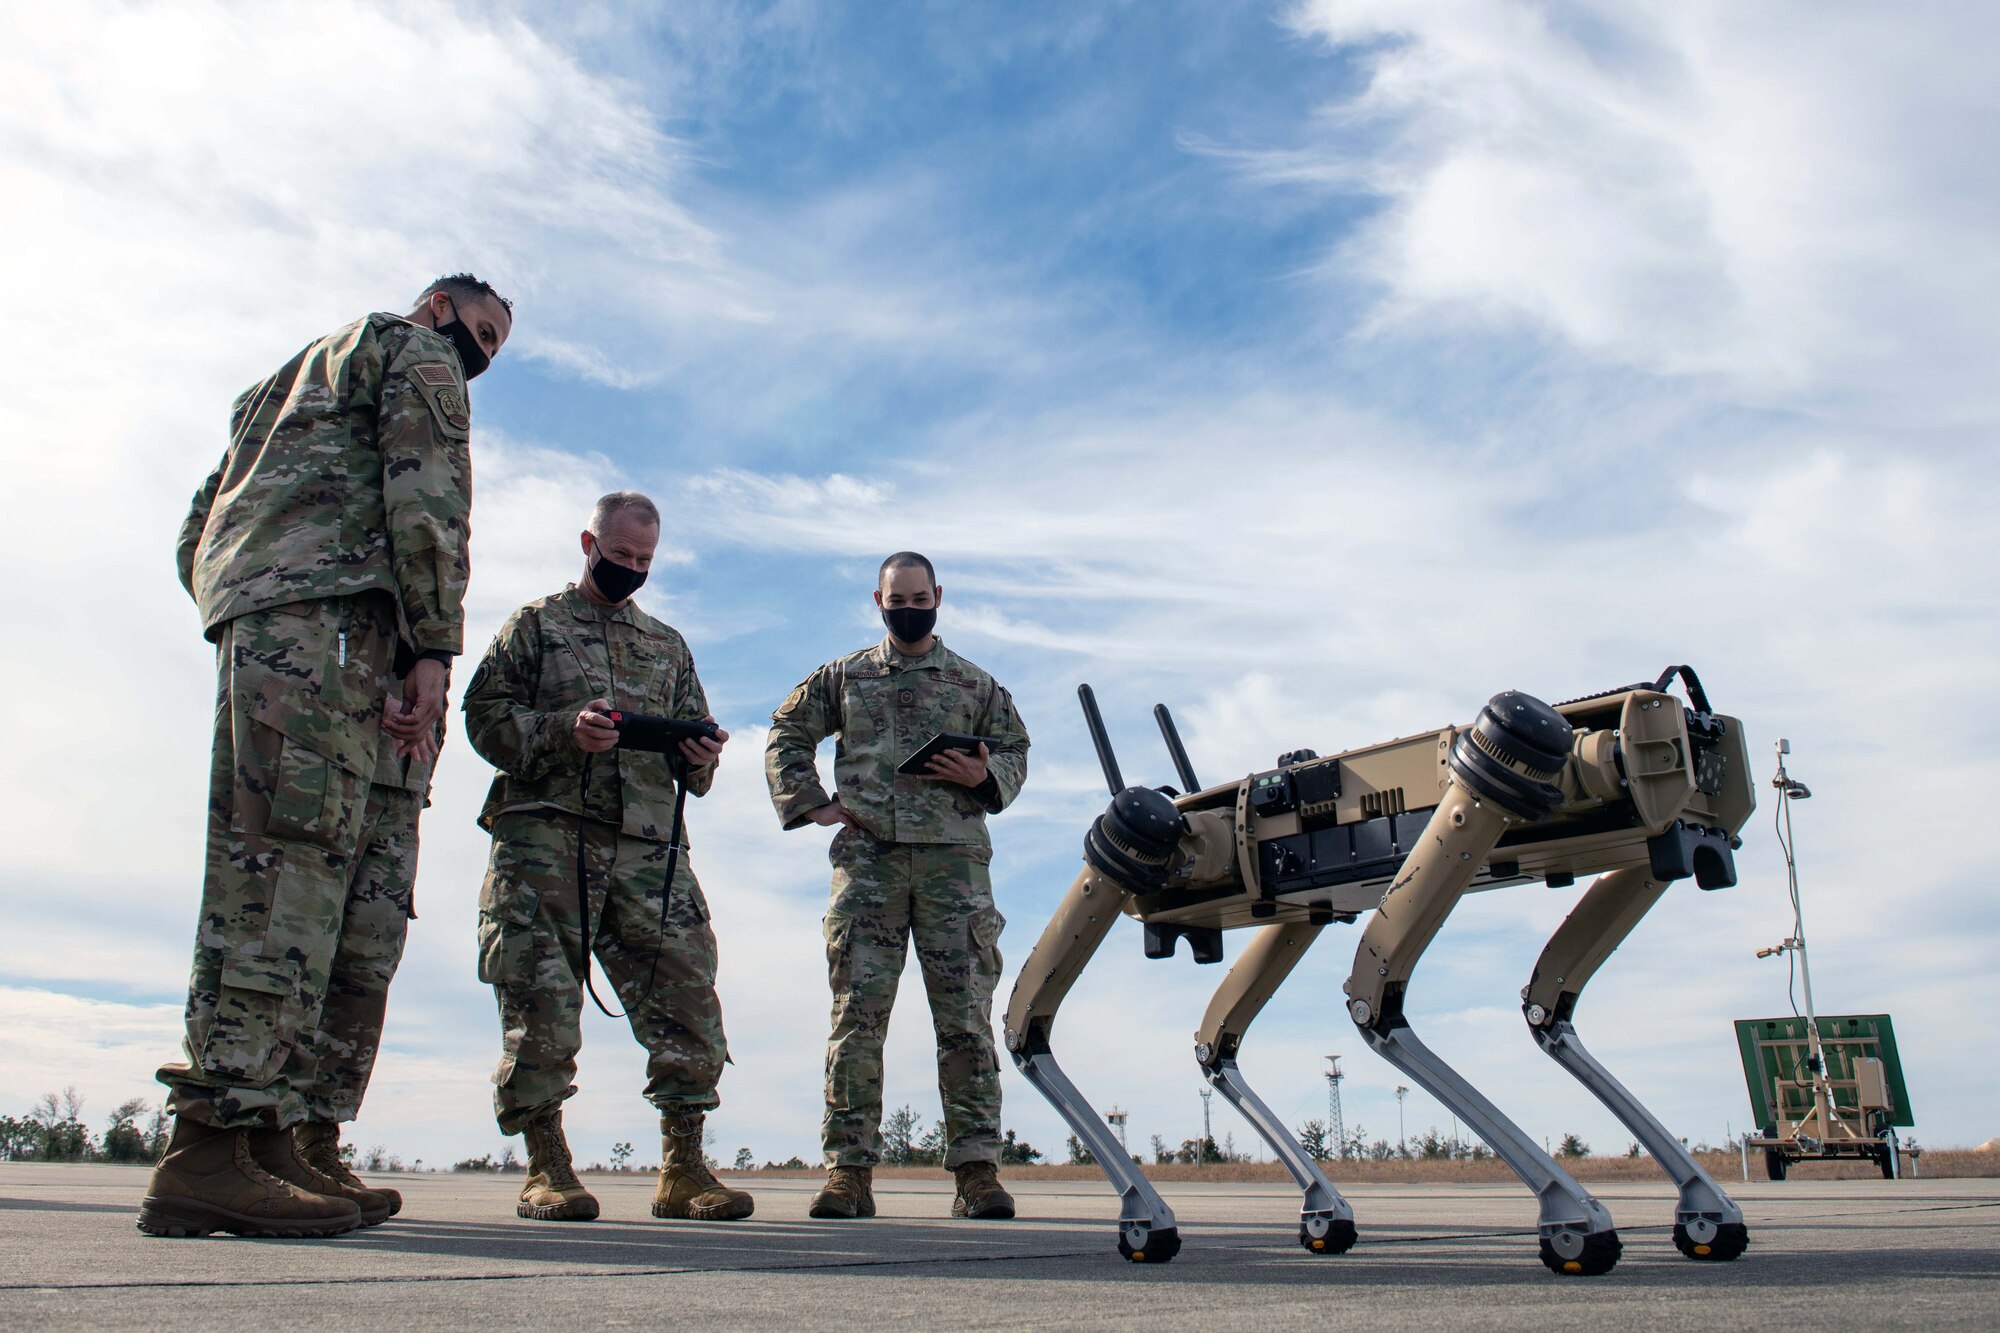 U.S. Air Force Gen. Mark D. Kelly, commander of Air Combat Command, operates a Quad-legged Unmanned Ground Vehicle